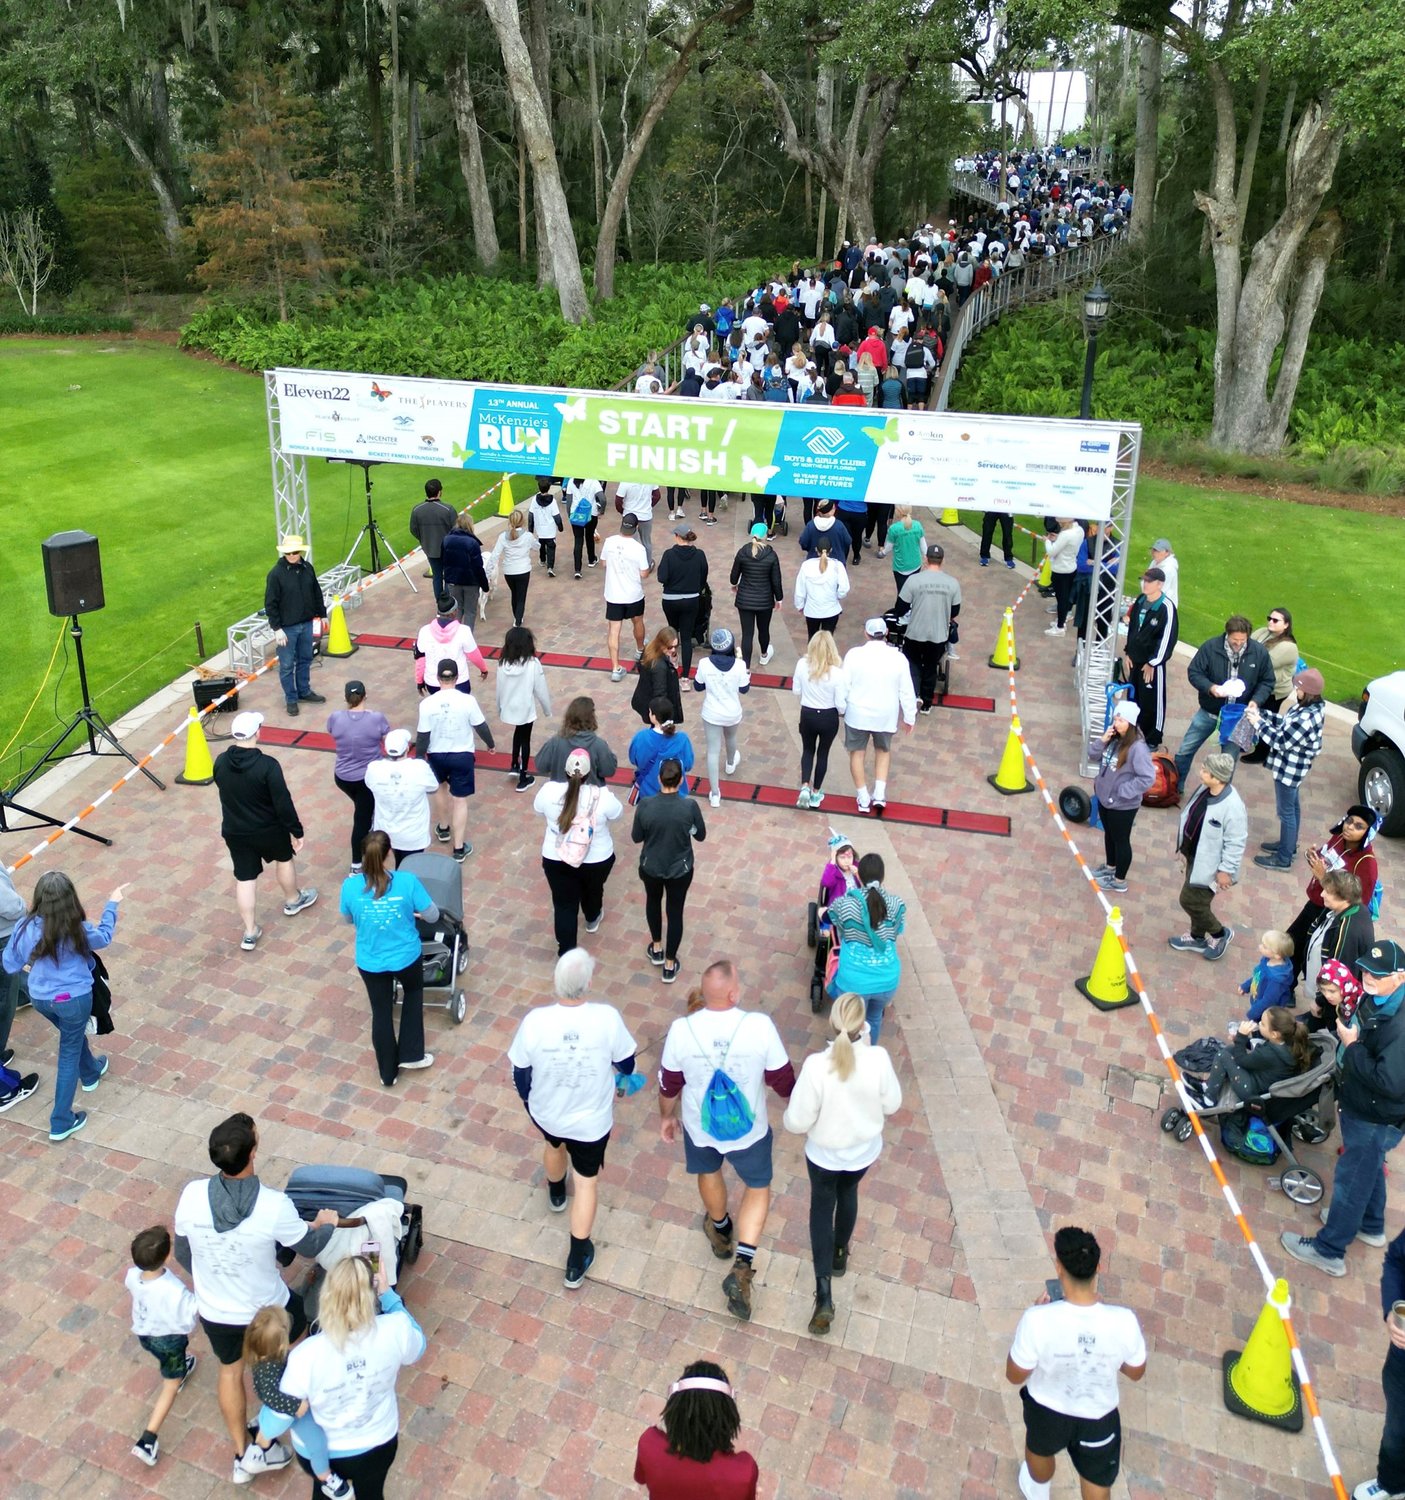 More than 1,100 runners and walkers gathered Nov. 19 at TPC Sawgrass for the 13th Annual McKenzie’s Run to help Boys & Girls Clubs of Northeast Florida raise $400,000 through the Great Futures Weekend.